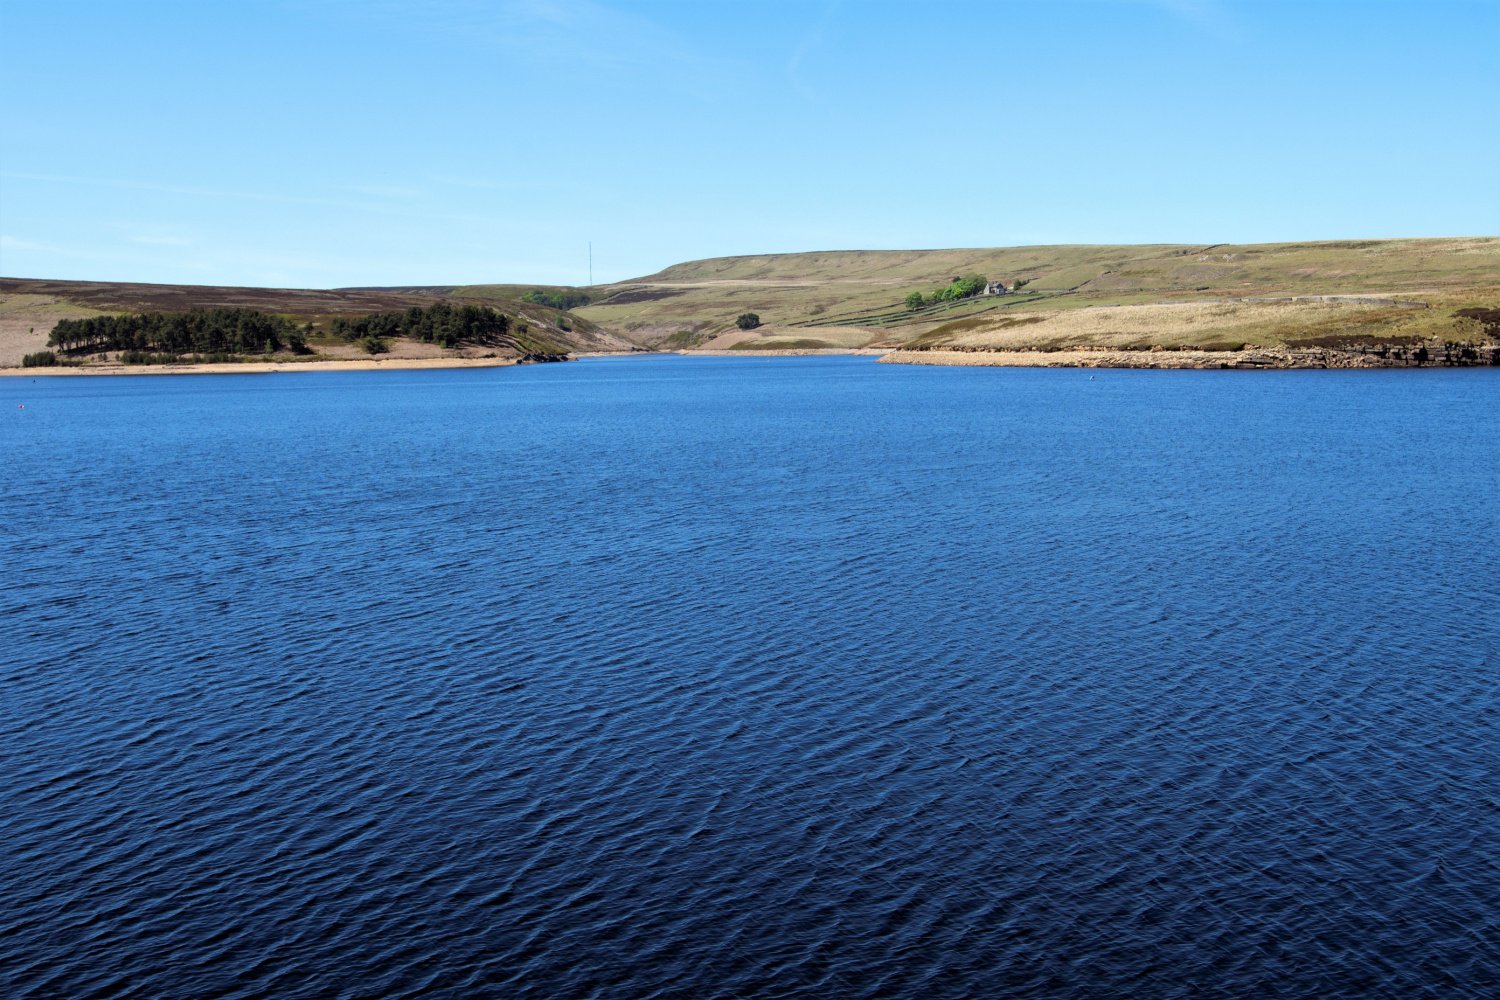 Image name winscar reservoir sheffield south yorkshire the 12 image from the post Walk: Winscar Reservoir in Yorkshire.com.